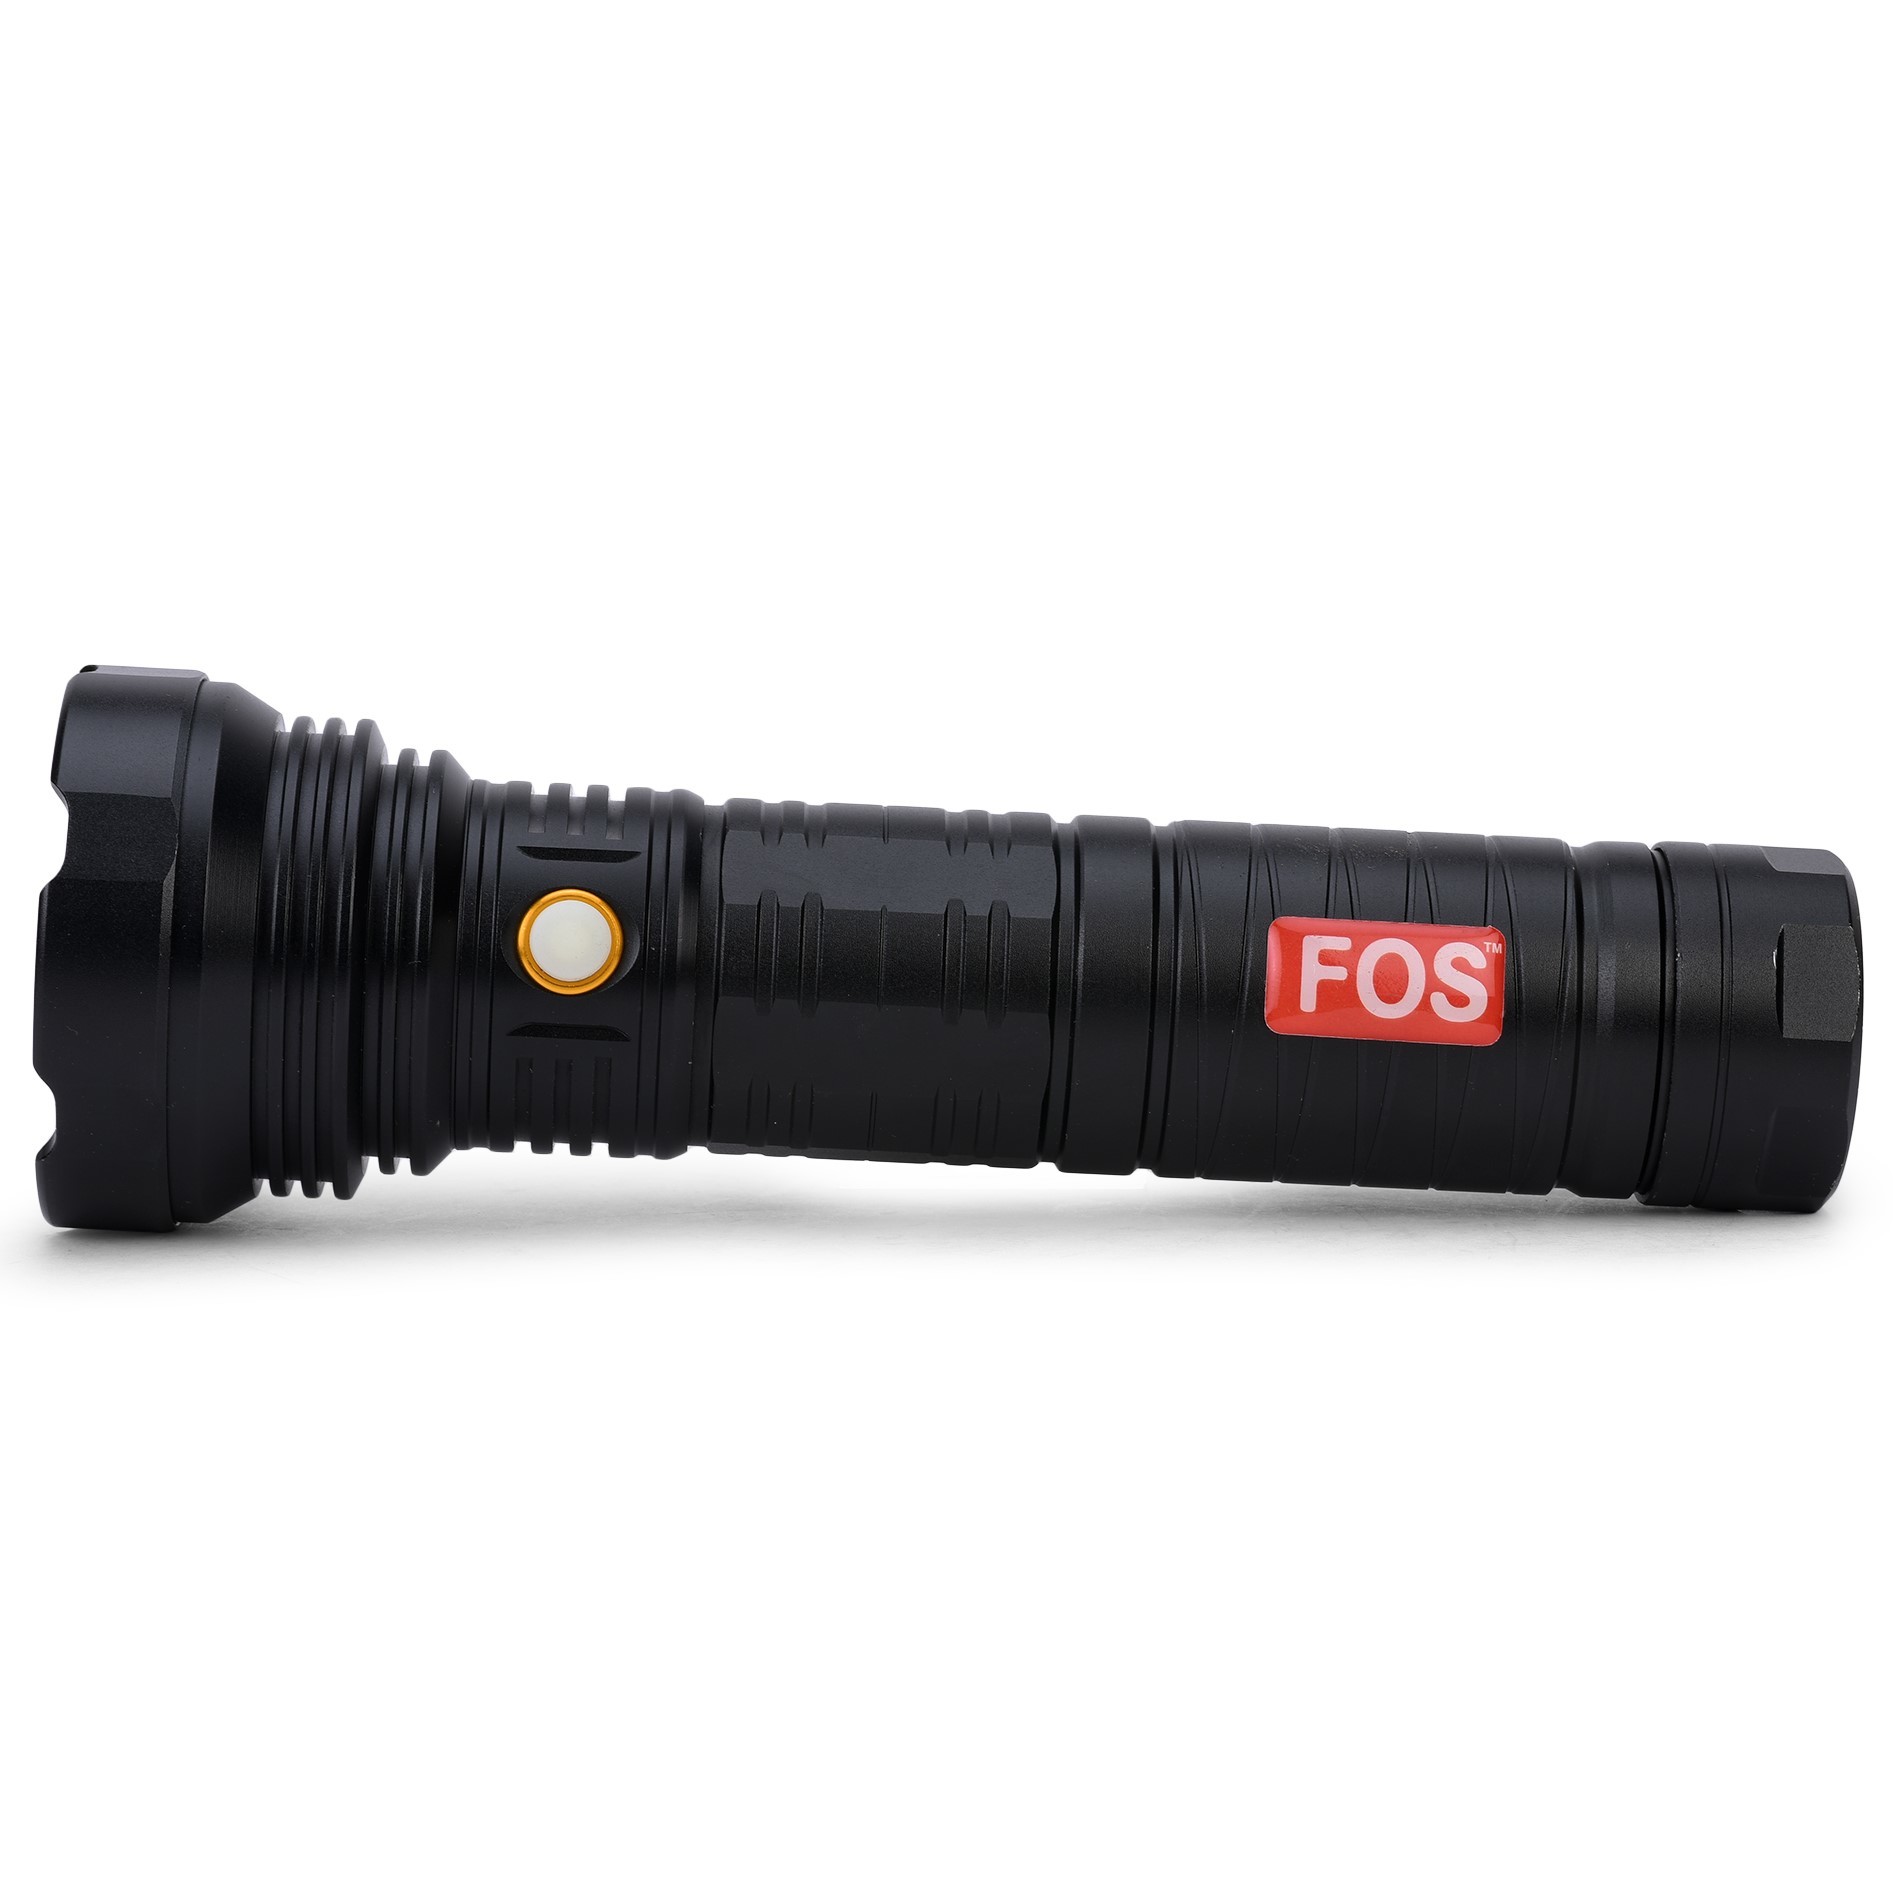 FOS LED Search Light 25W (Range 1.5 Km.) with 15 Ah Lithium-ion Battery